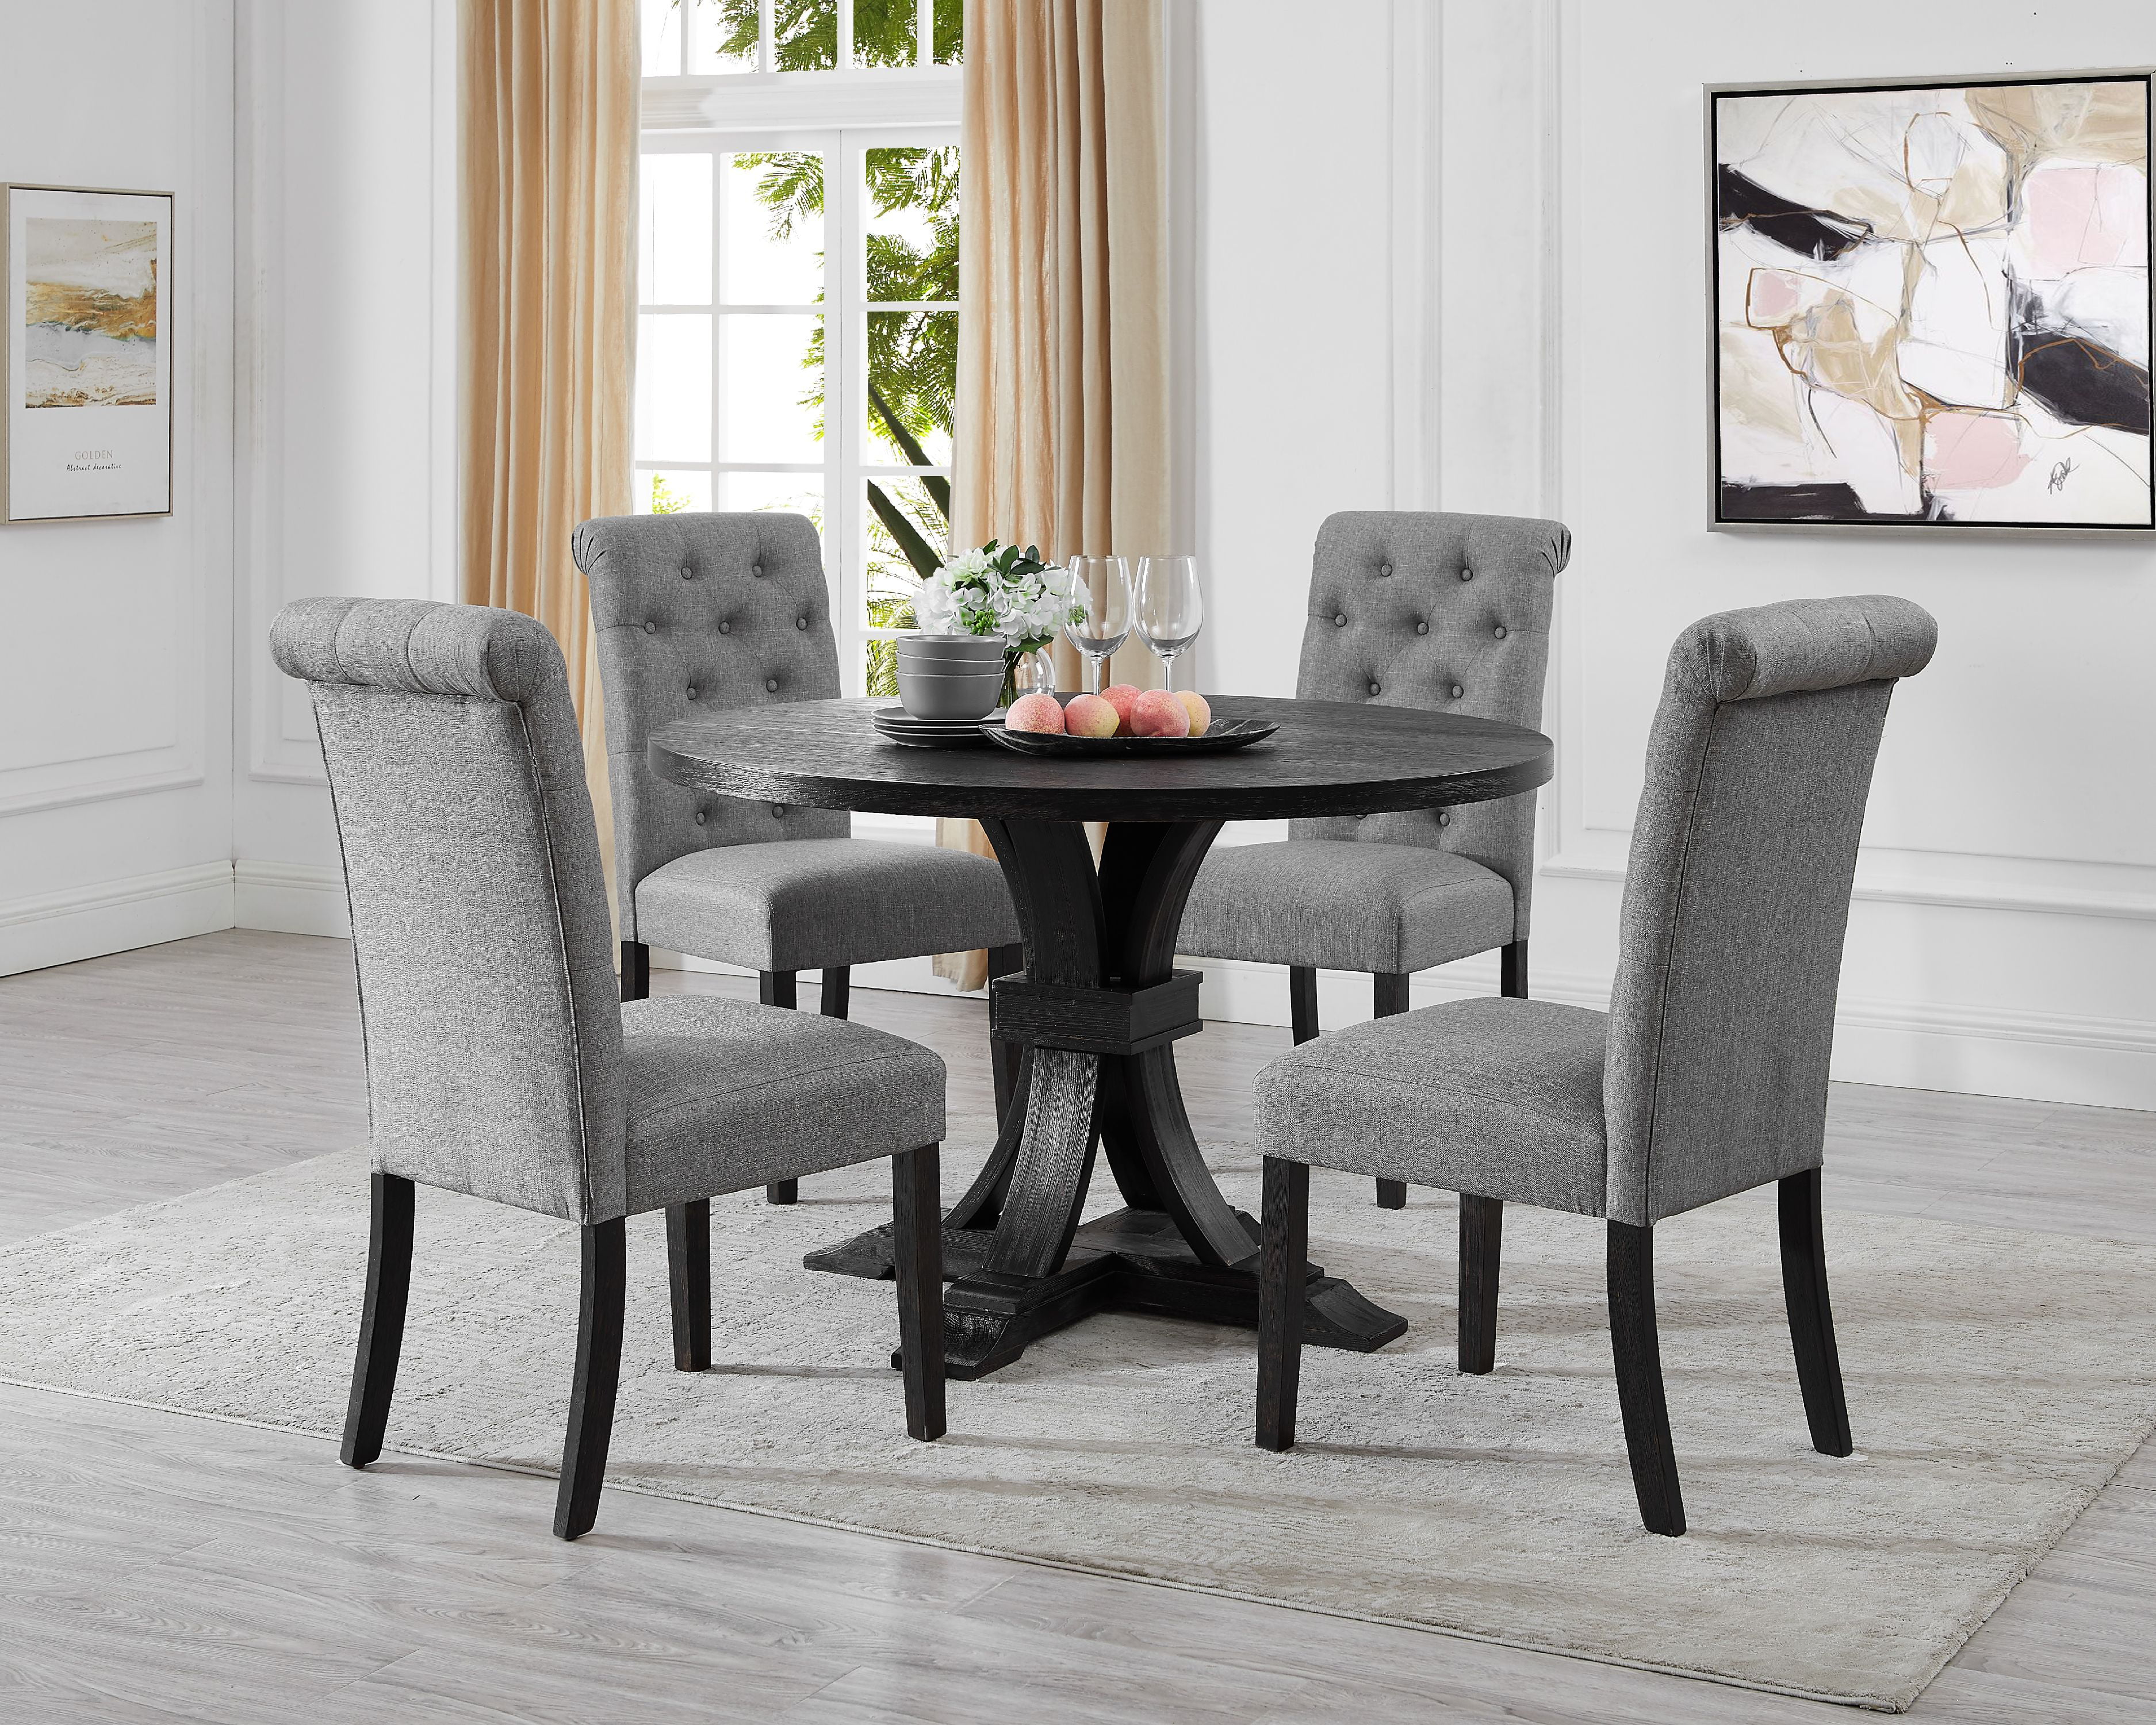 Siena Distressed Black Finish 5 Piece, Black Round Pedestal Table And Chairs